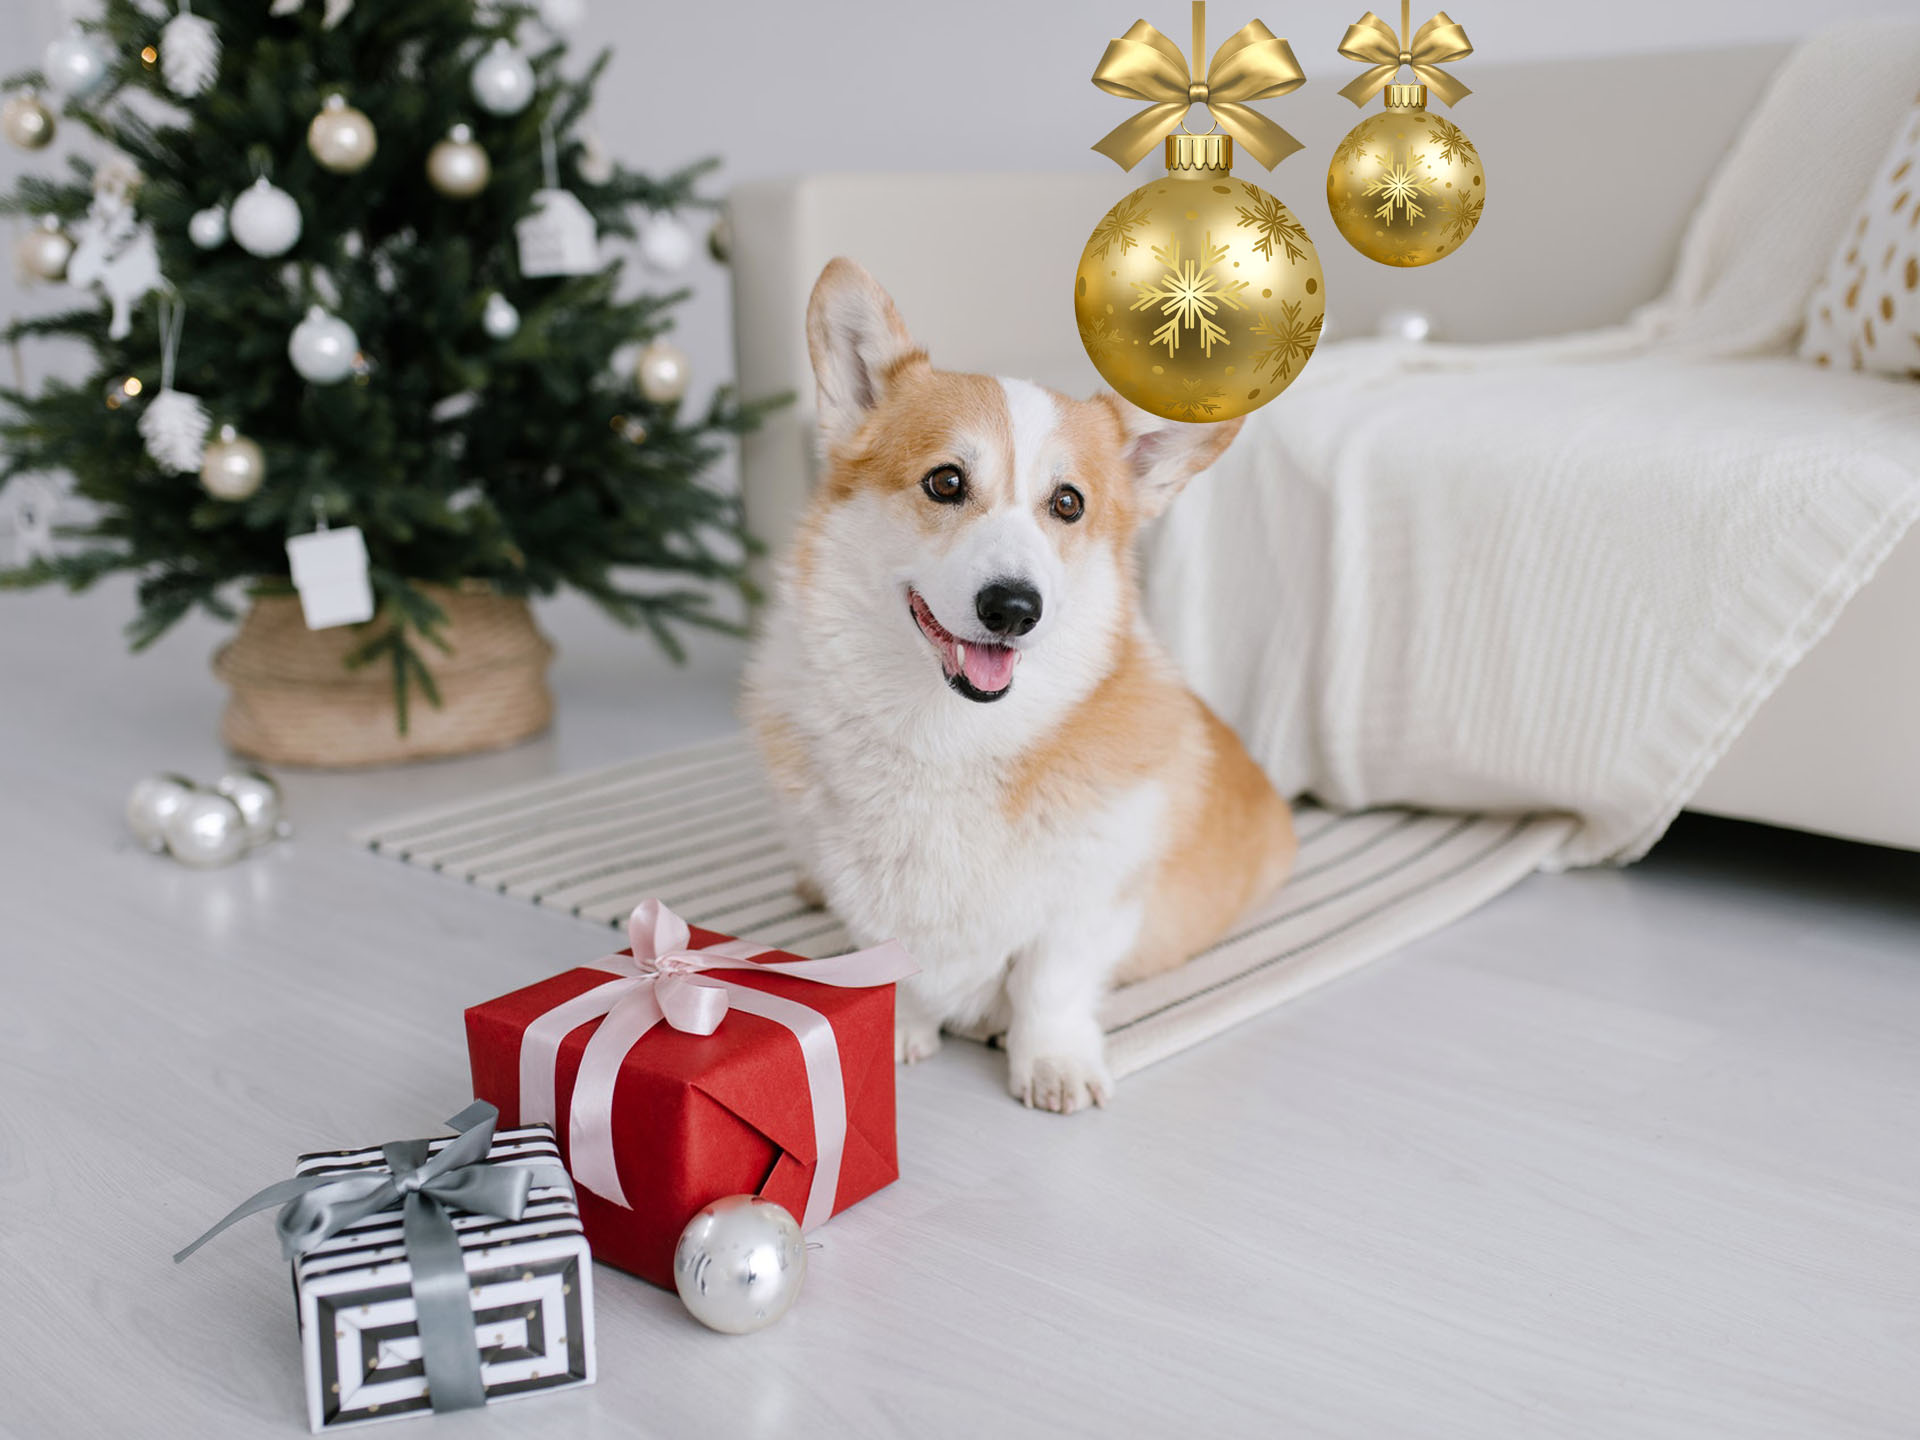 Pawfect Gifts for your Best Friend